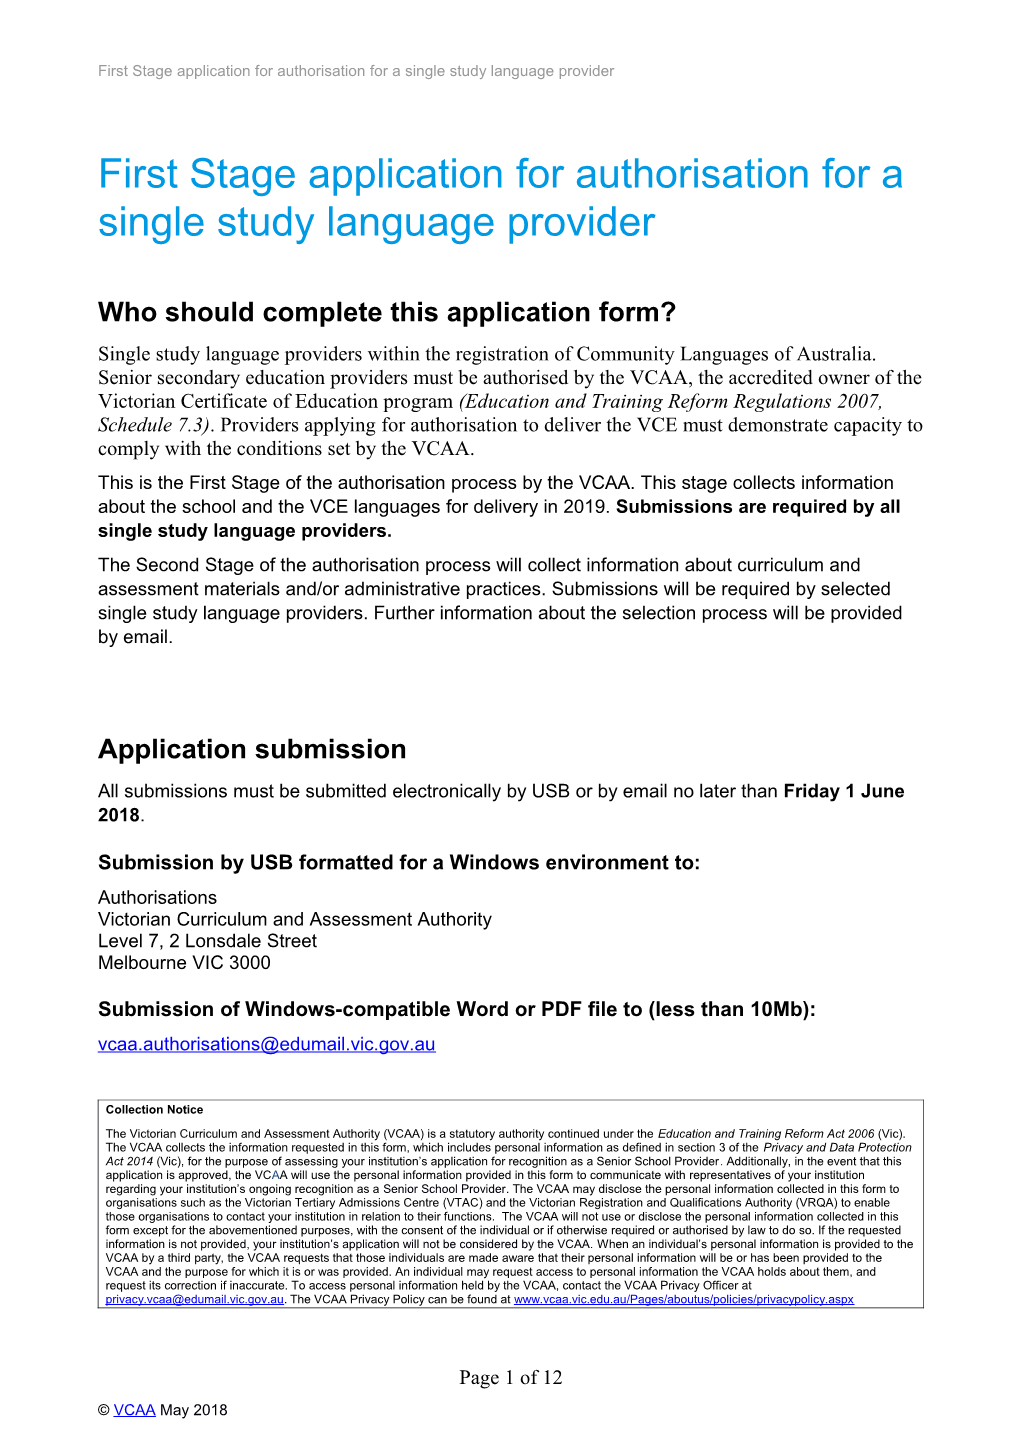 First Stage Application for Authorisation for a Single Study Language Provider